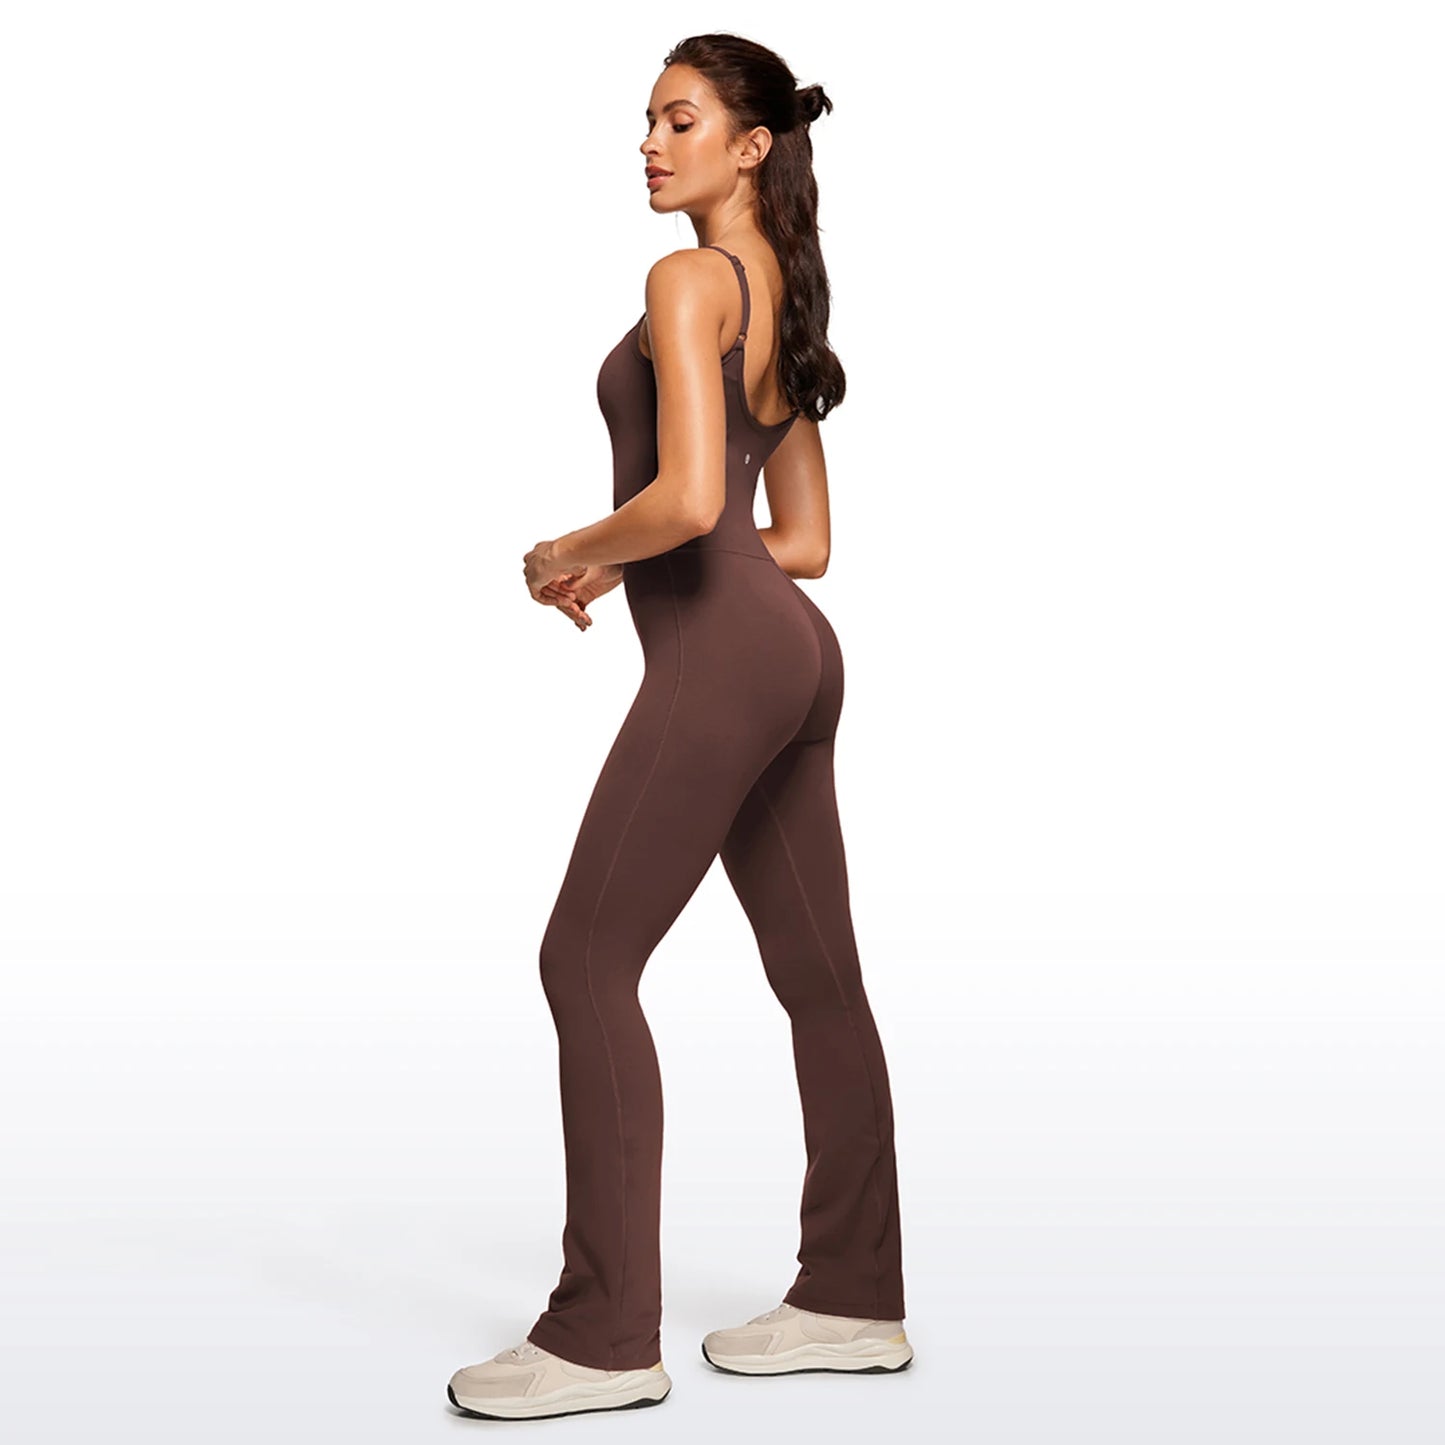 CRZ YOGA Butterluxe Flare Jumpsuits for Women Spaghetti Strap Workout Athletic Onesie Square Neck Bodysuits with Built in Bra